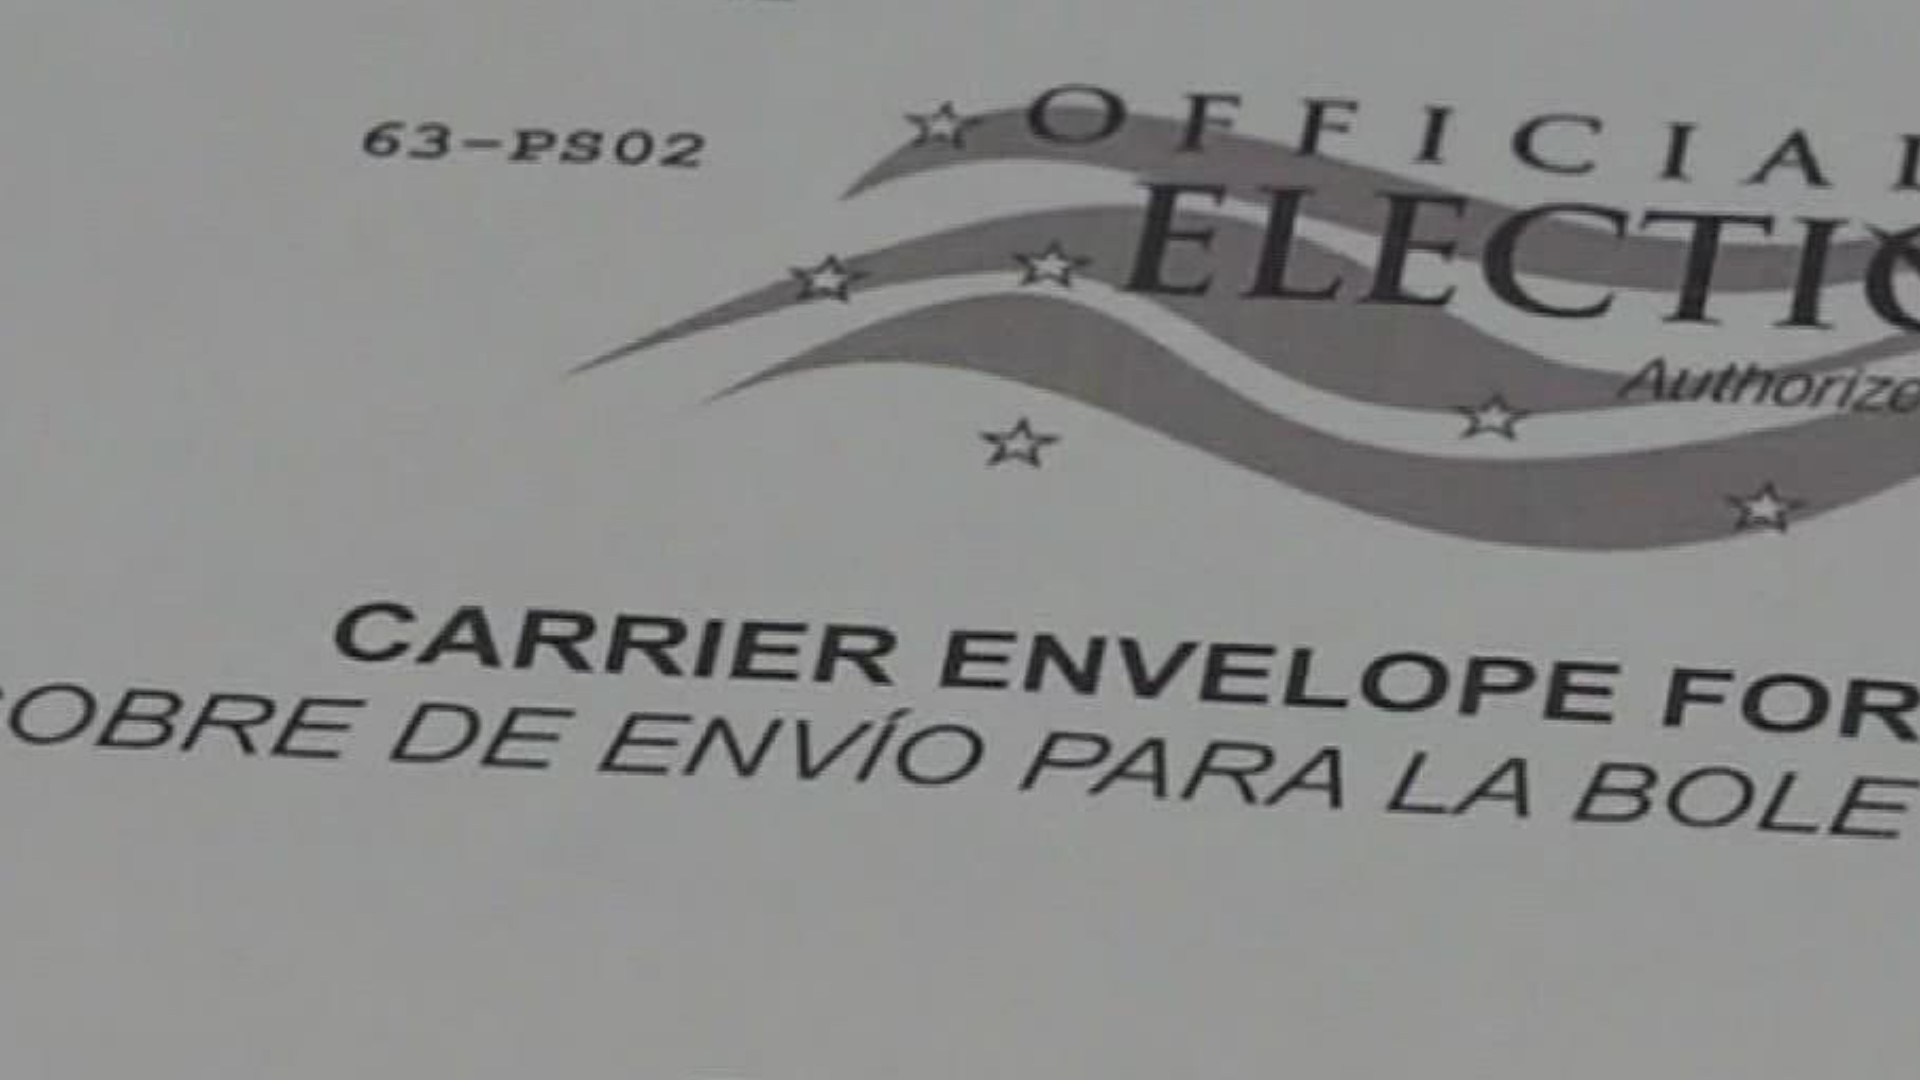 A Nueces County couple received the right ballots, but the return envelopes had both the wrong name and wrong address.